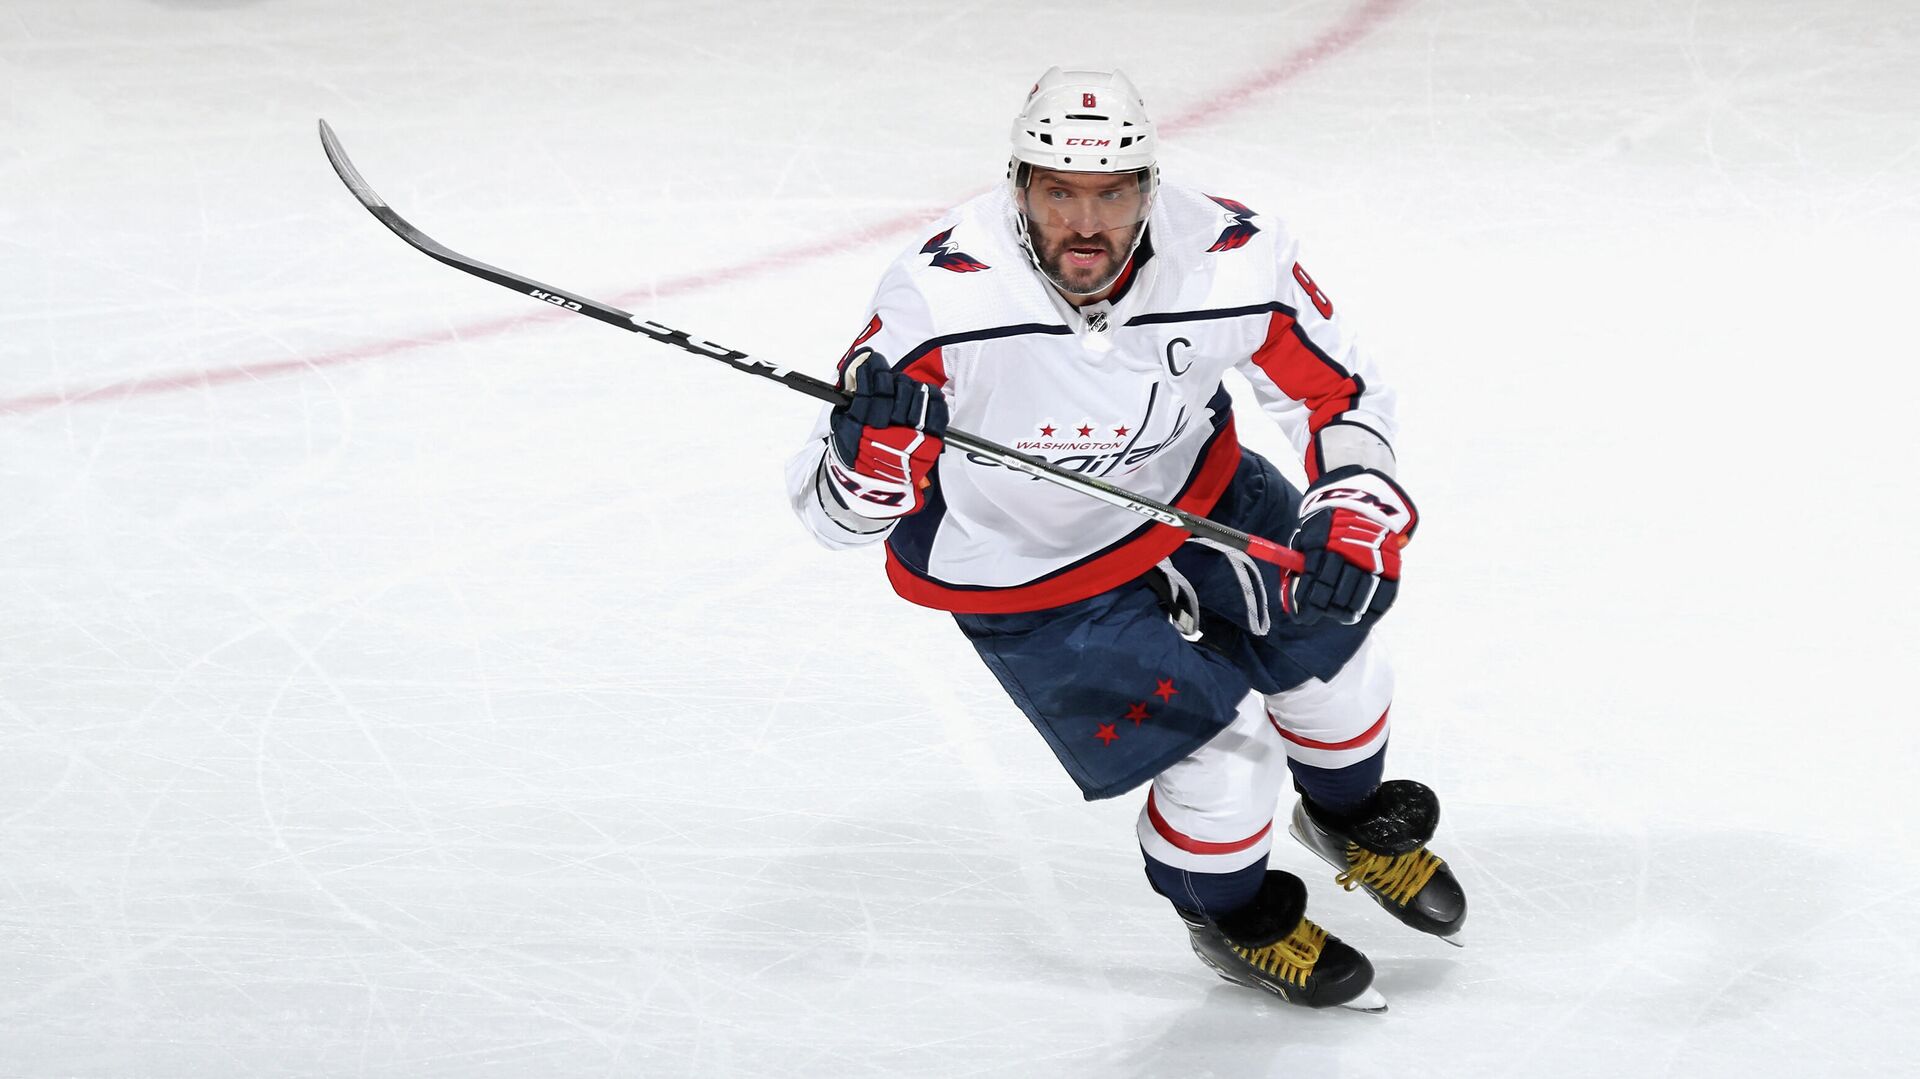 NEWARK, NEW JERSEY - APRIL 02: Alex Ovechkin #8 of the Washington Capitals skates against the New Jersey Devils on April 02, 2021 in Newark, New Jersey.   Bruce Bennett/Getty Images/AFP (Photo by BRUCE BENNETT / GETTY IMAGES NORTH AMERICA / Getty Images via AFP) - РИА Новости, 1920, 05.04.2021